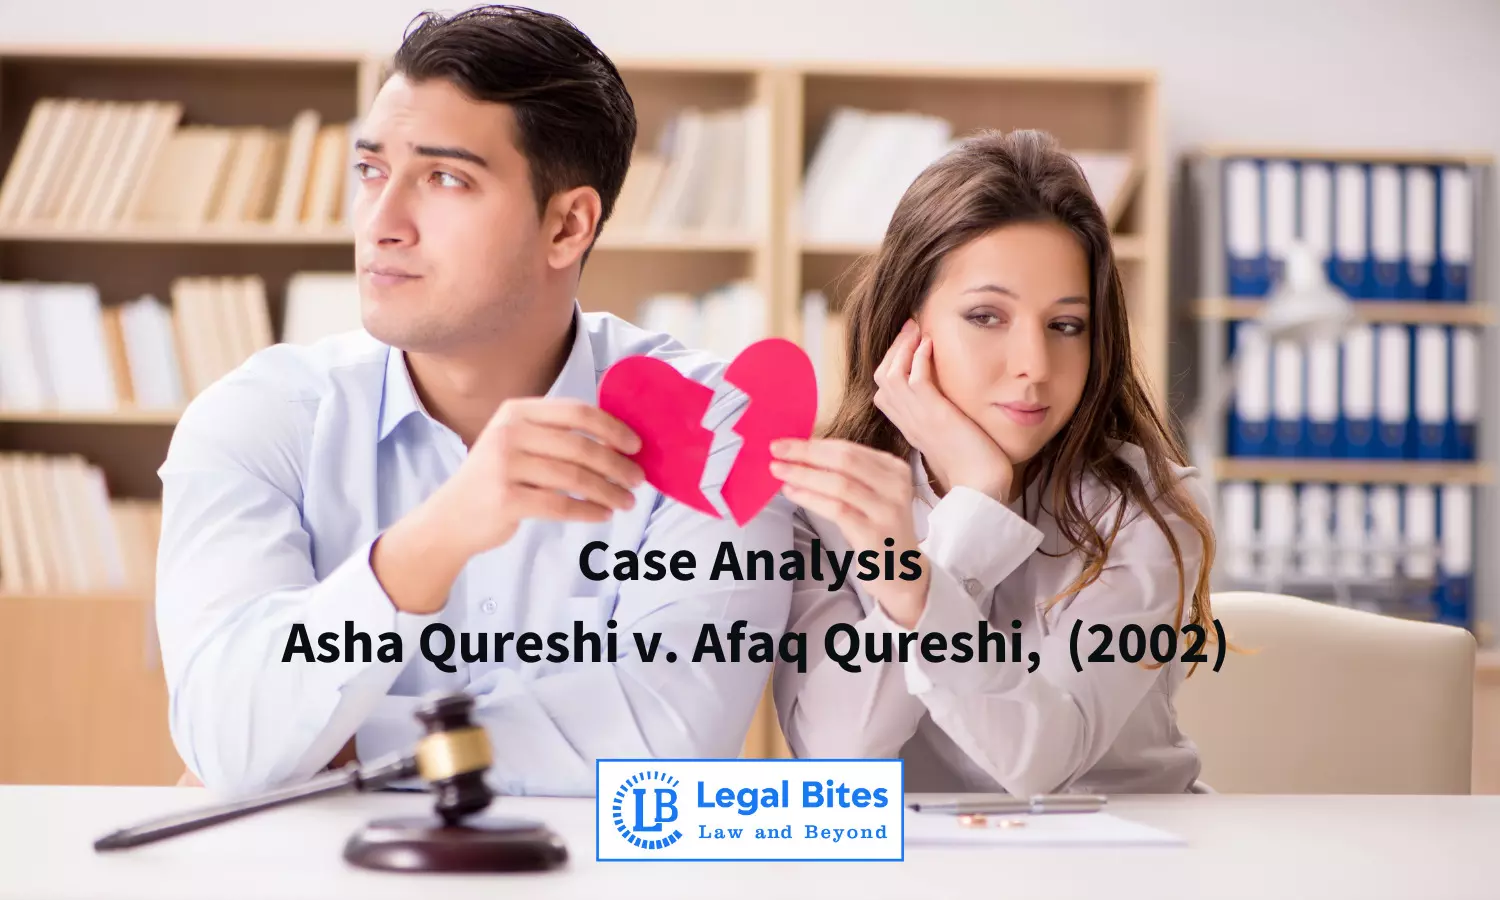 Case Analysis: Asha Qureshi v. Afaq Qureshi, (2002) | Nullity of Marriage under Special Marriage Act